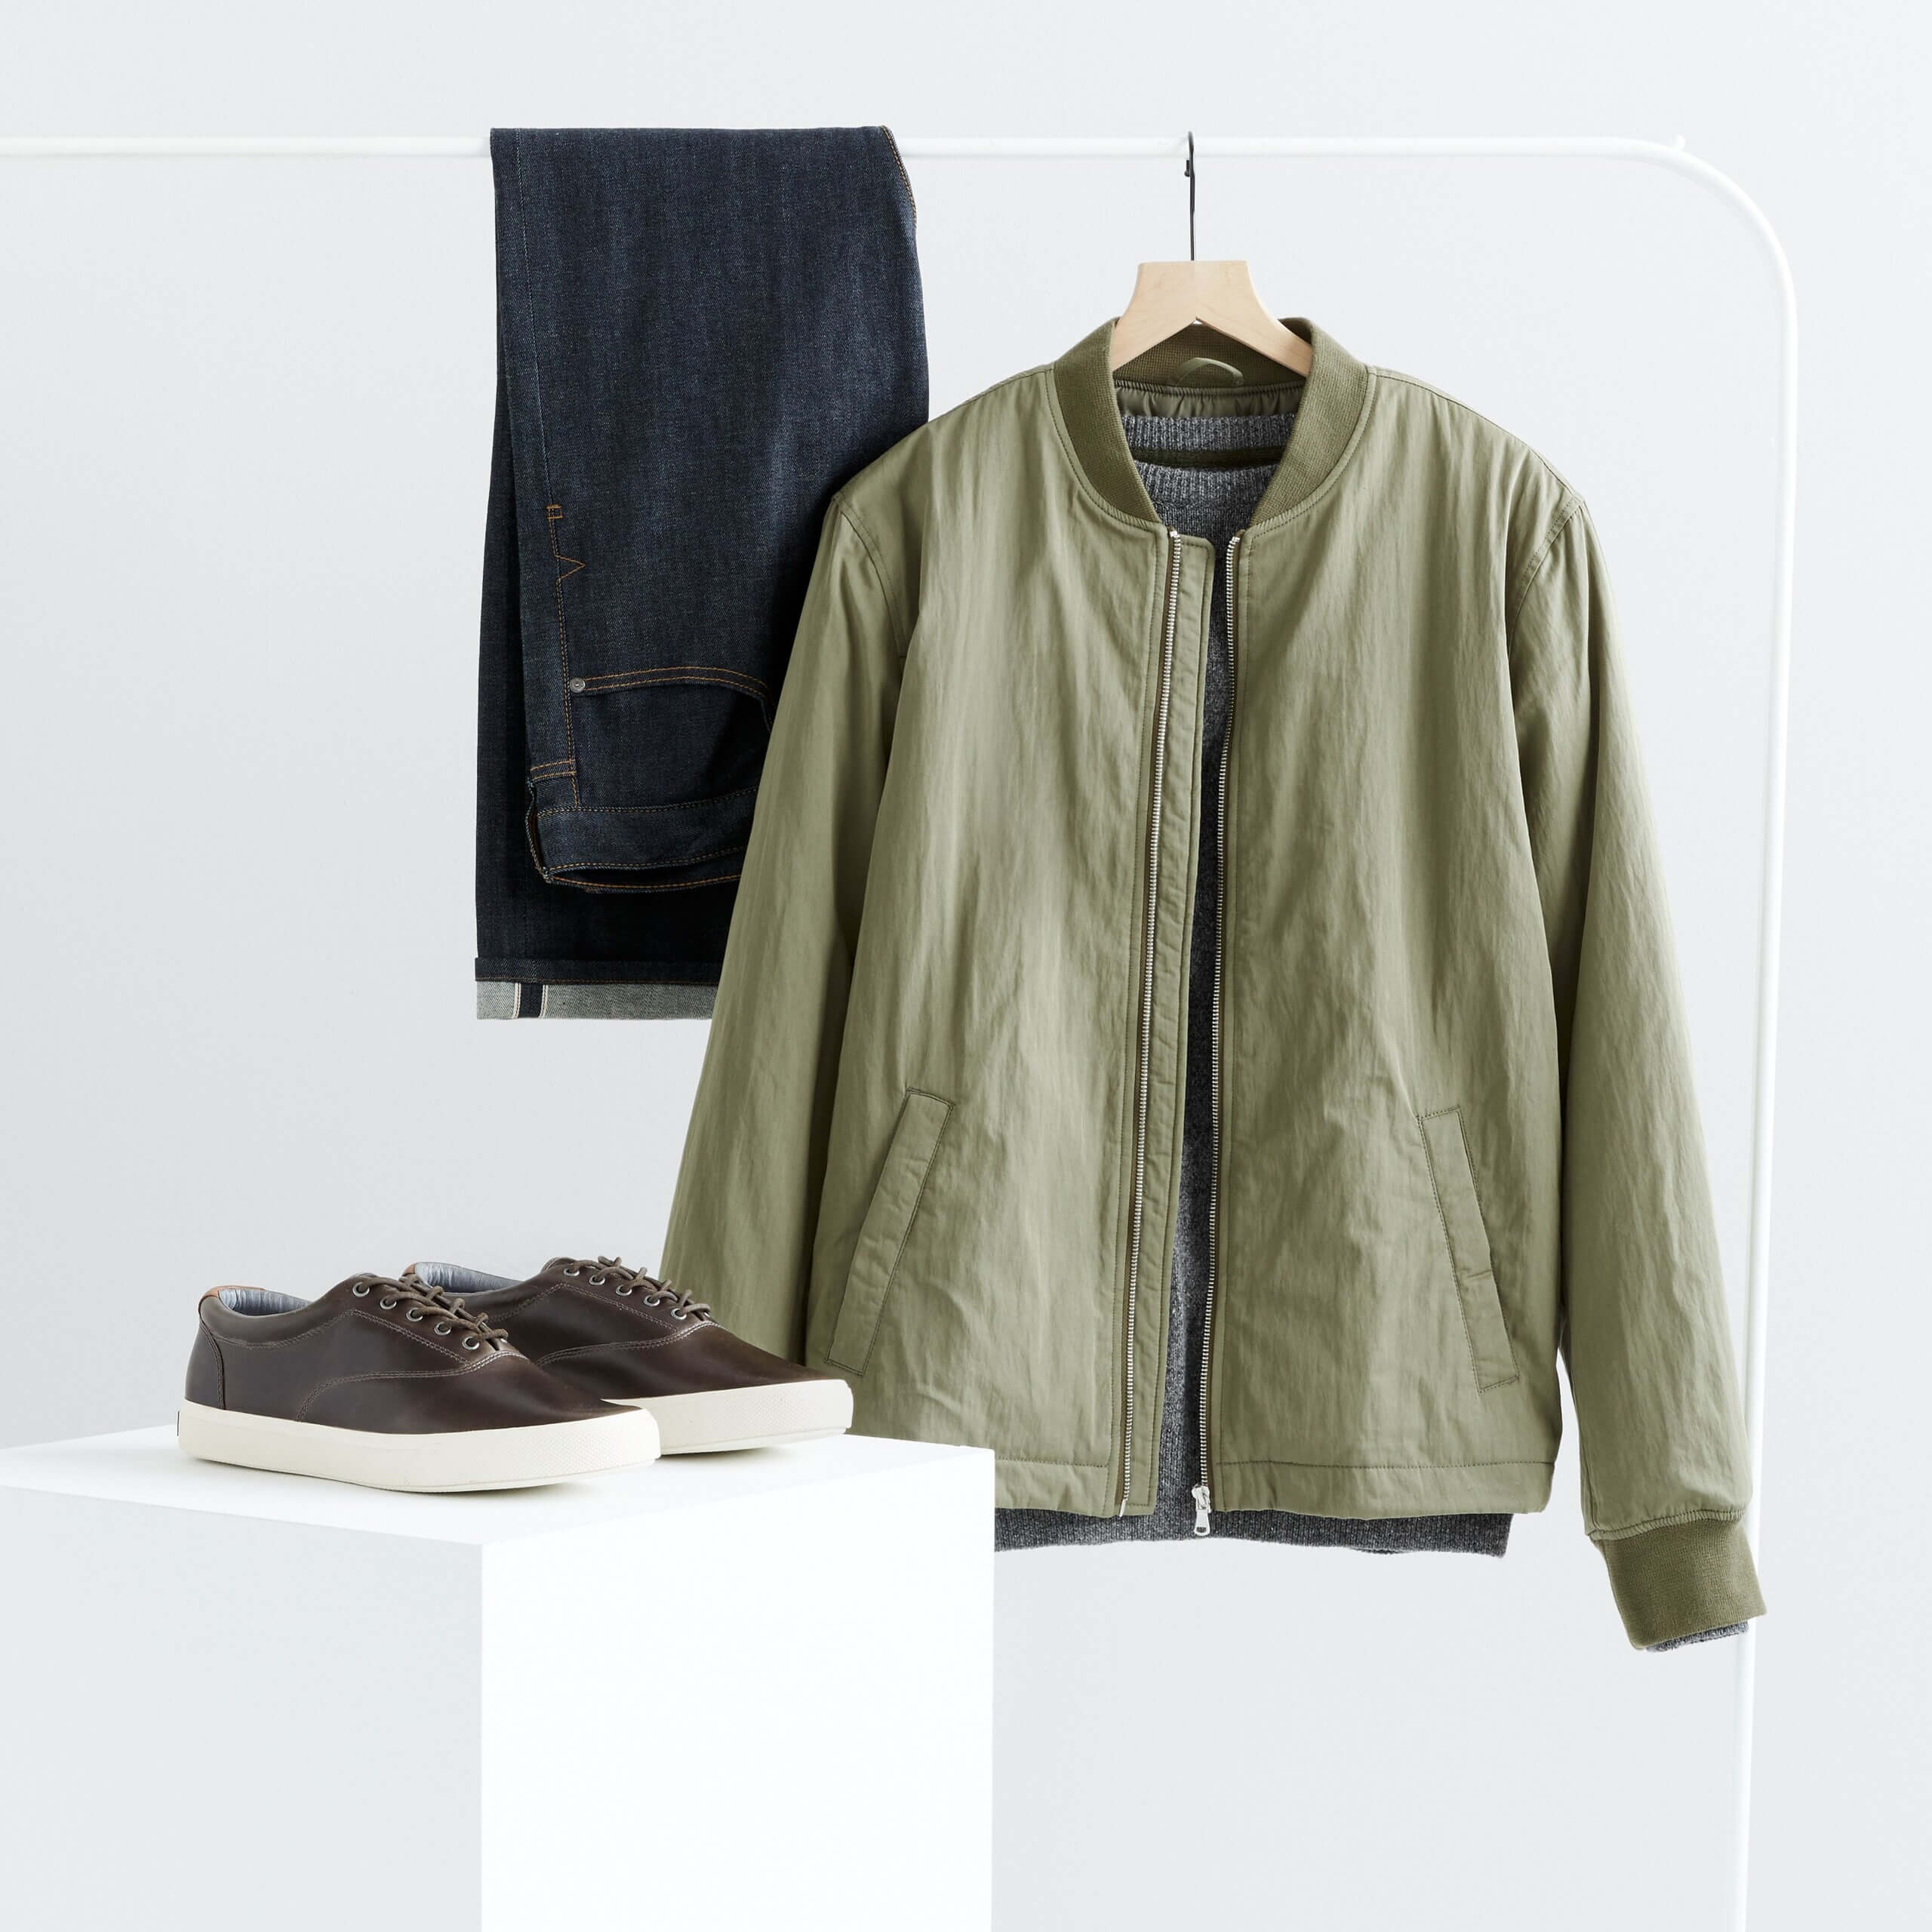 Stitch Fix men’s workleisure outfit featuring blue jeans and olive green bomber jacket on clothing rack with brown leather sneakers on pedestal.